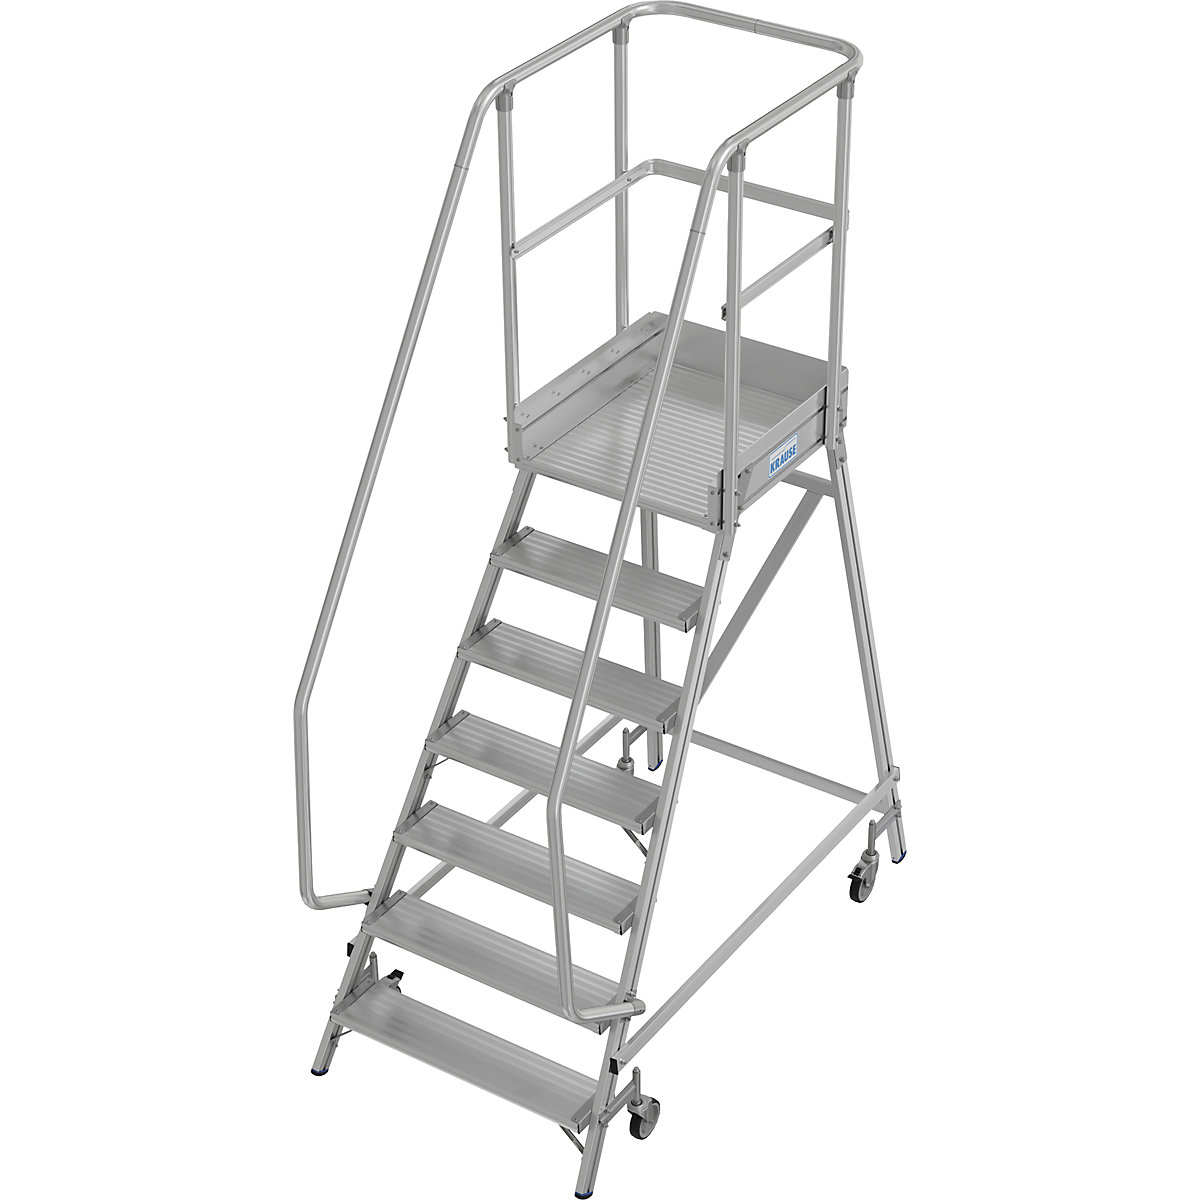 Mobile safety steps – KRAUSE, single sided access, foot rail, 7 steps, 2+ items-13